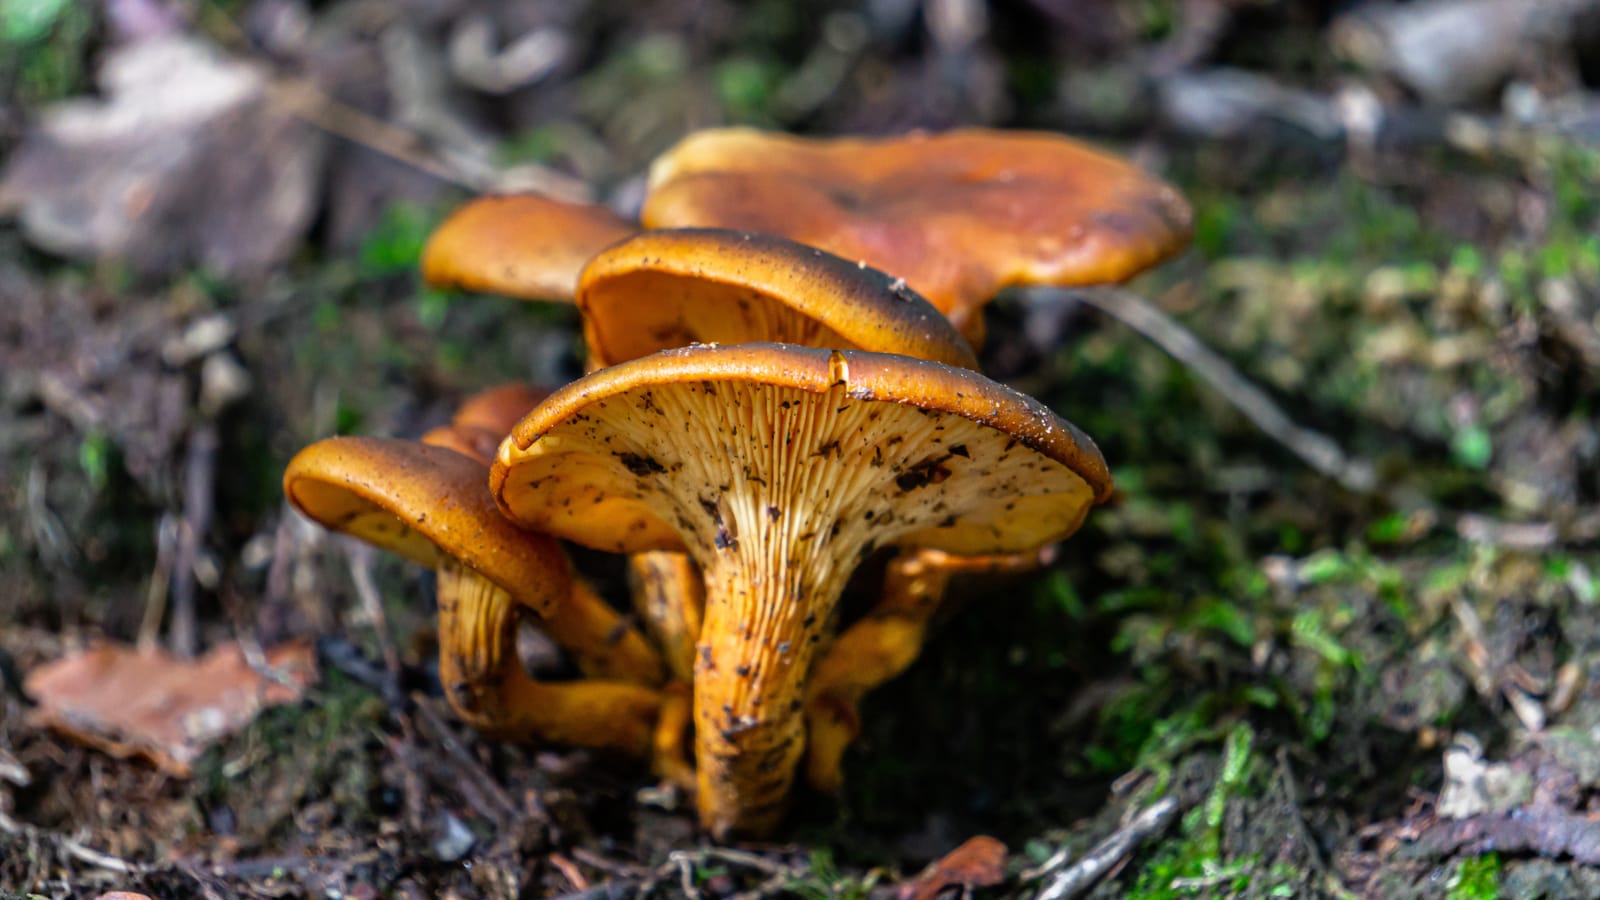 cluster of Omphalotus olearius, commonly known as the jack-o'-lantern mushrooms, are poisonous orange gilled mushrooms. They are notable for their bioluminescent properties.